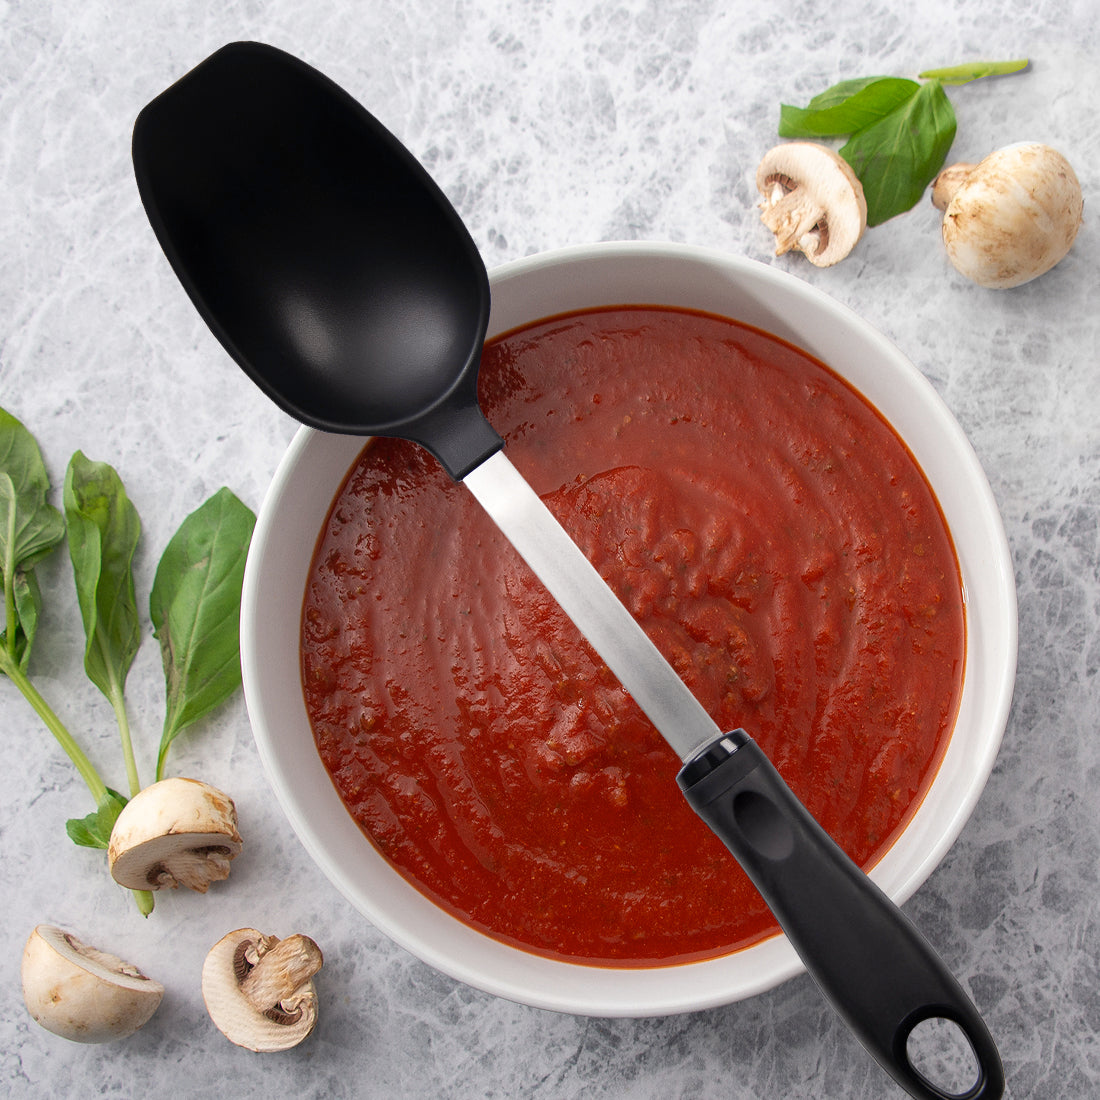 Basting Spoon over red sauce, mushrooms, and leafy greens.